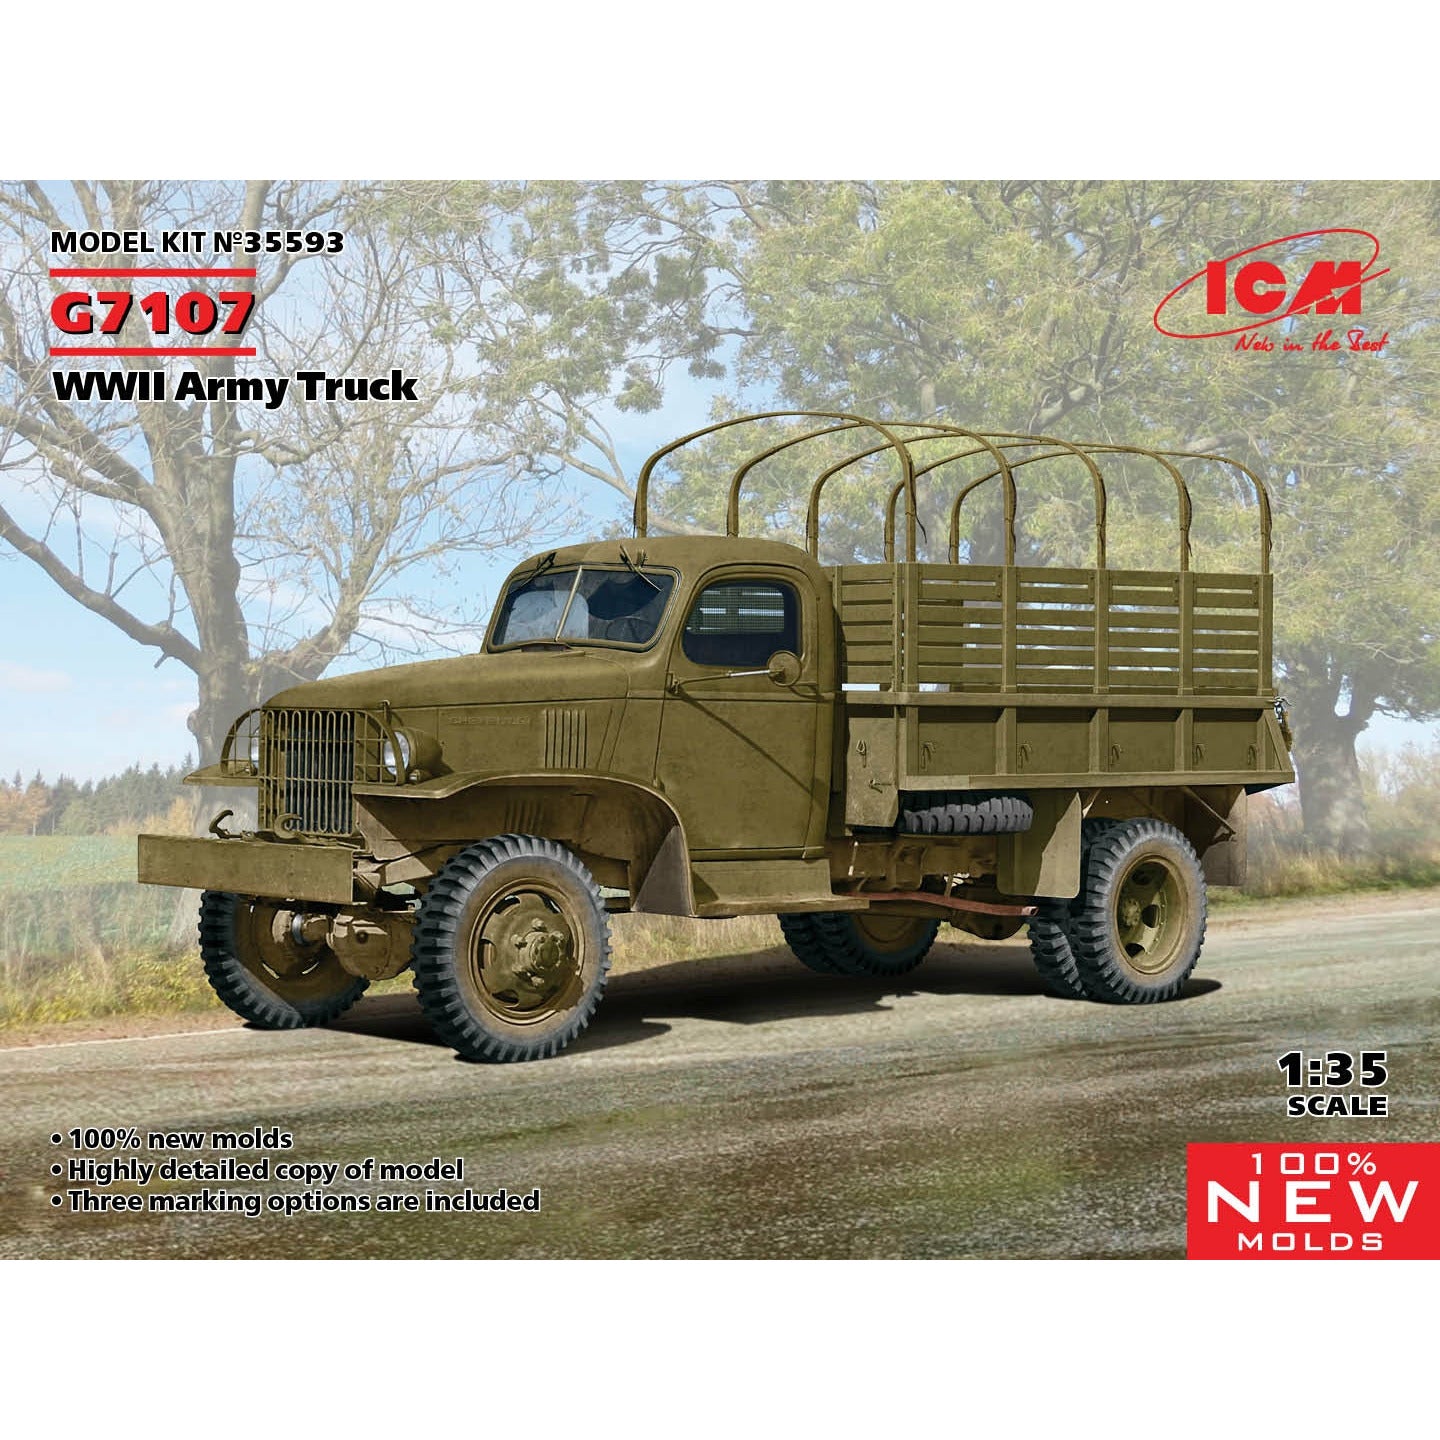 G7107, WWII Army Truck (100% new molds) 1/35 #35593 by ICM